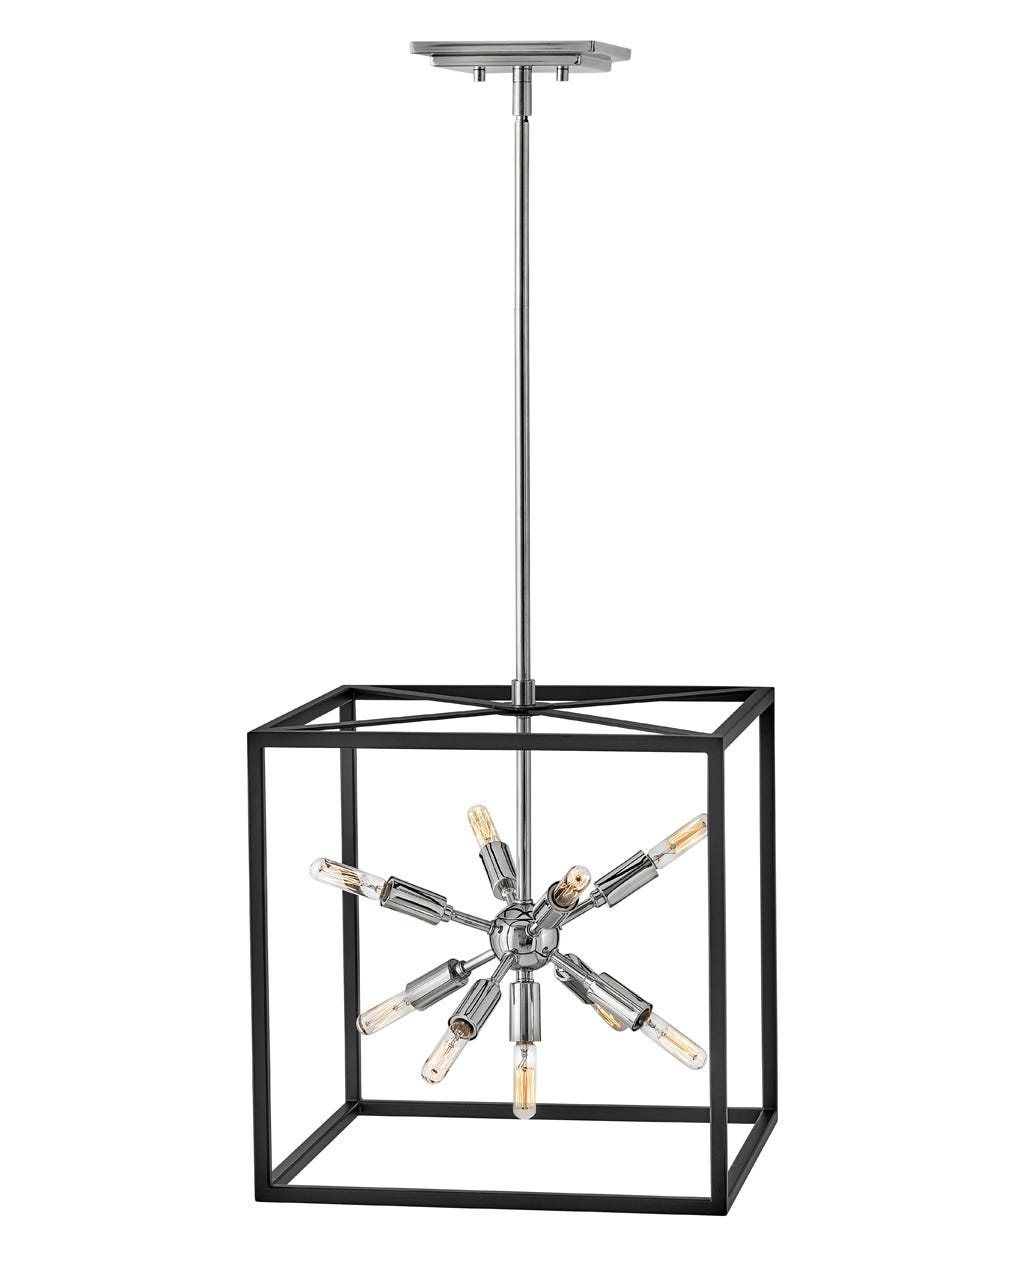 Hinkley Aros Pendant Pendant Hinkley Black with Polished Nickel accents 15.0x15.0x16.0 